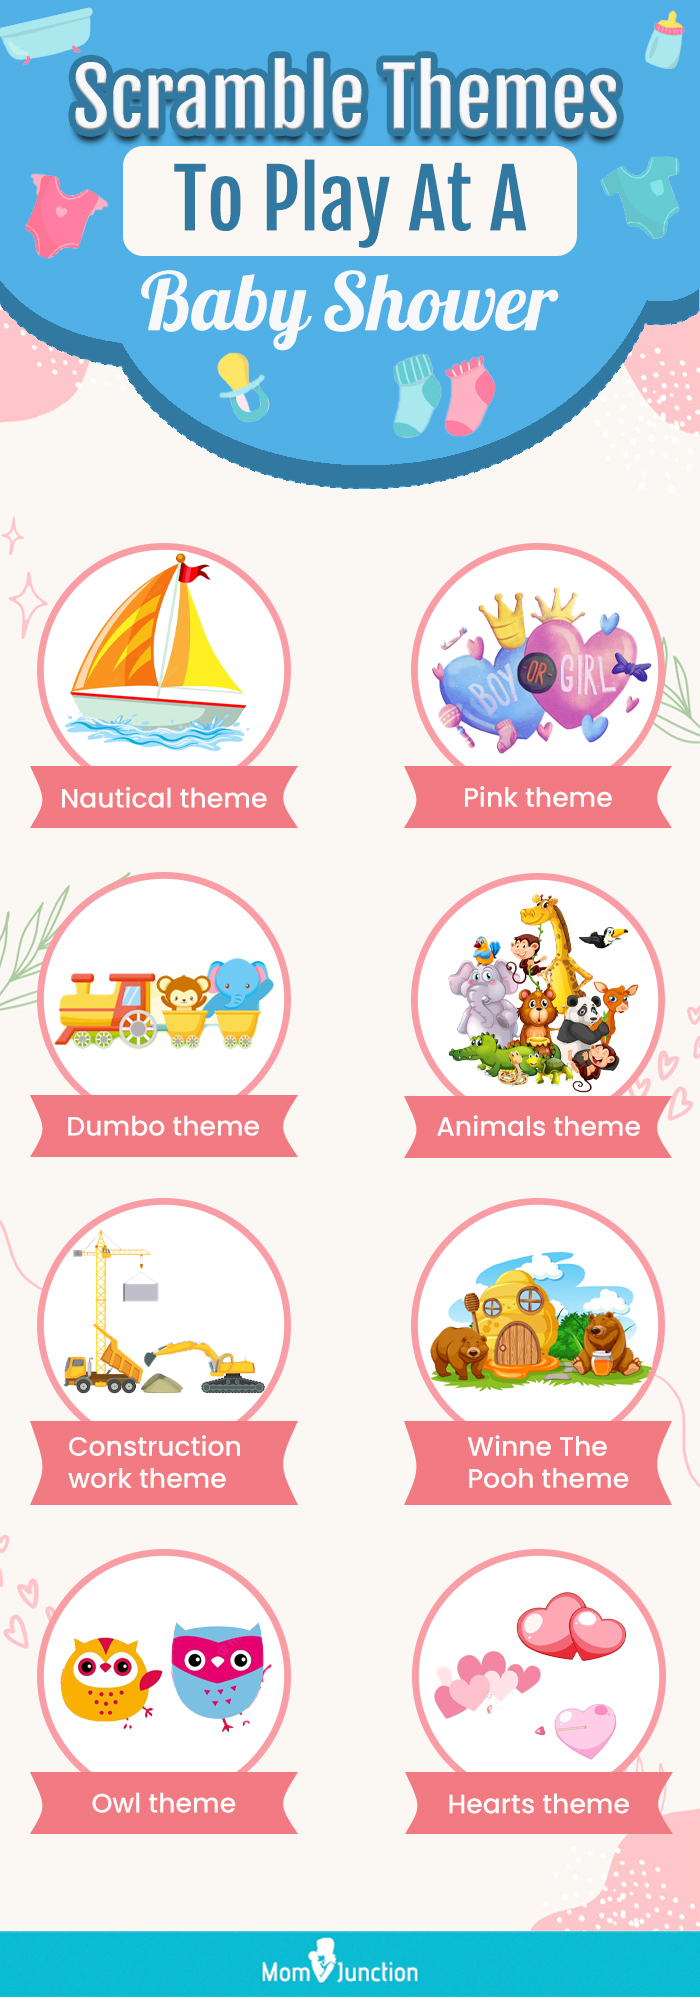 scramble themes to play at a baby shower (infographic)